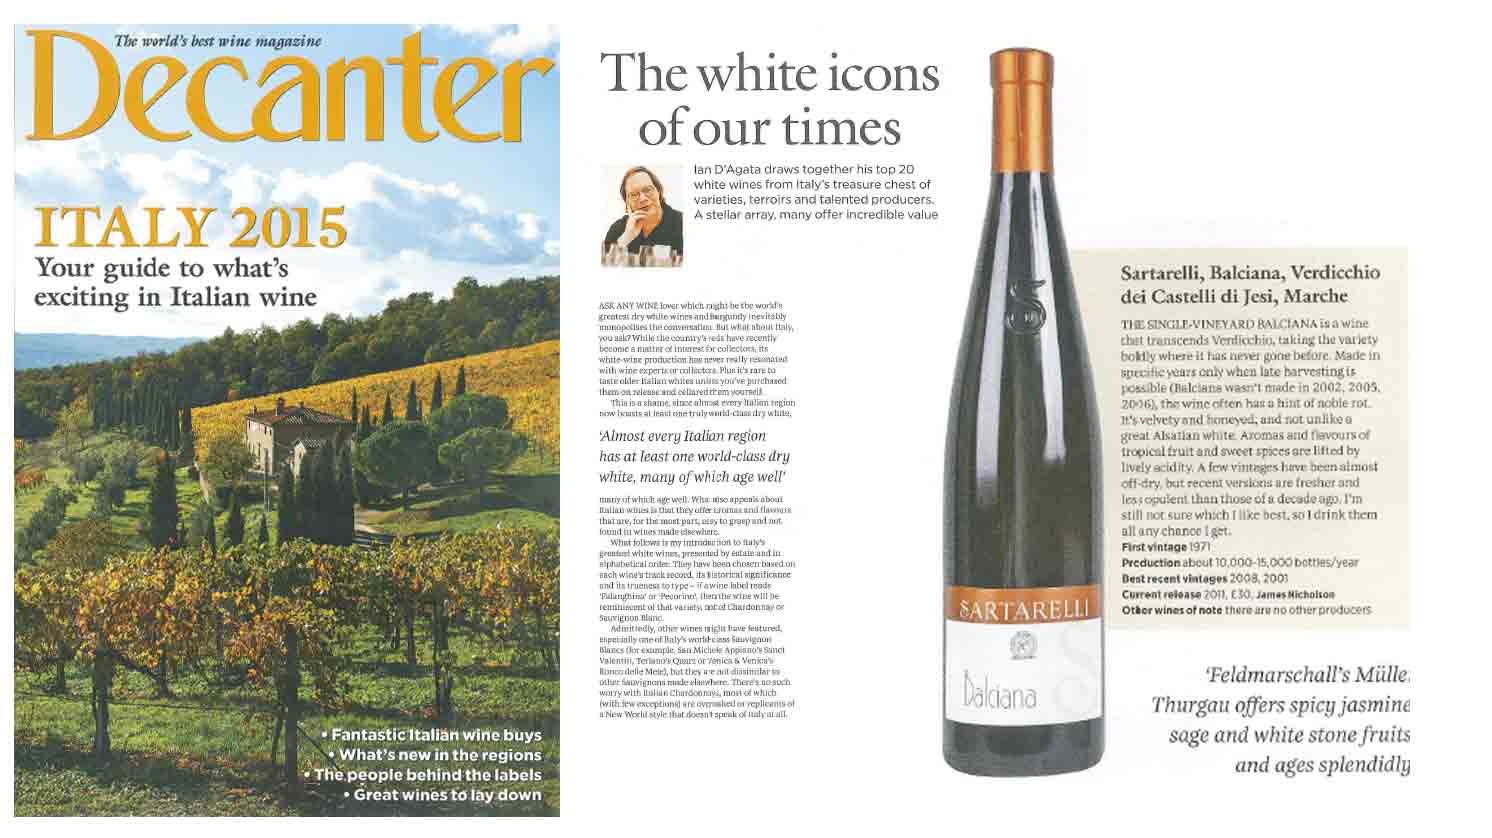 Decanter - The white icons of our times